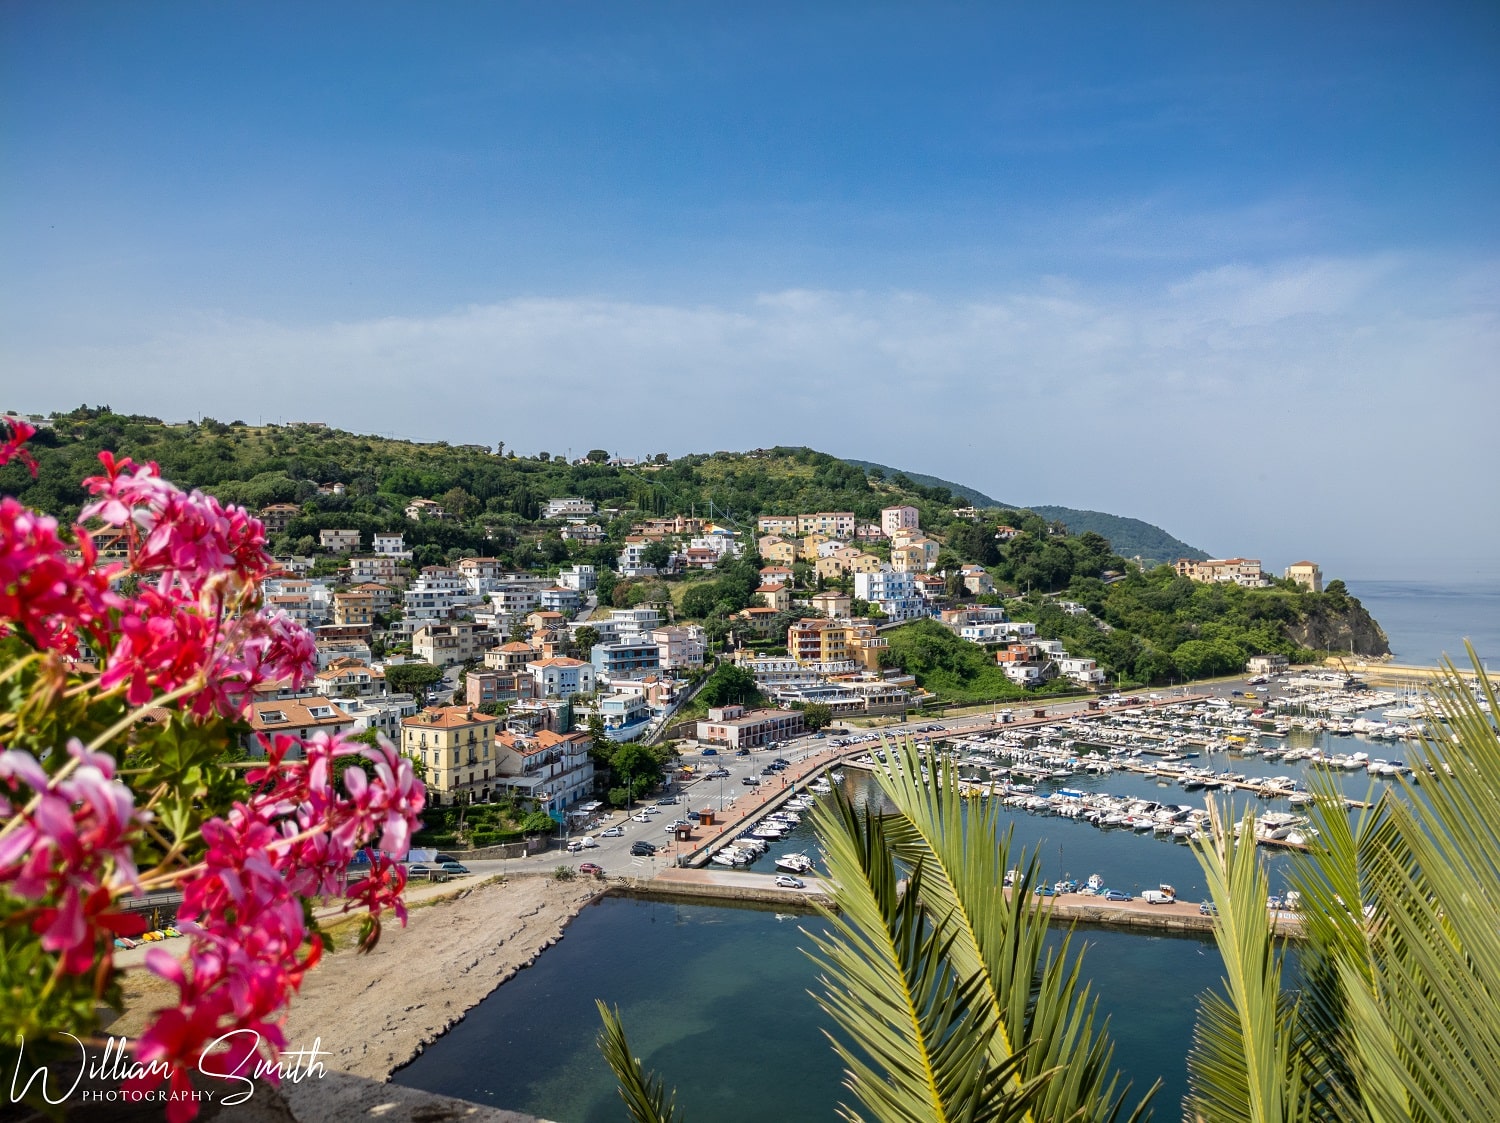 A view of the port of Agropoli, Cilento